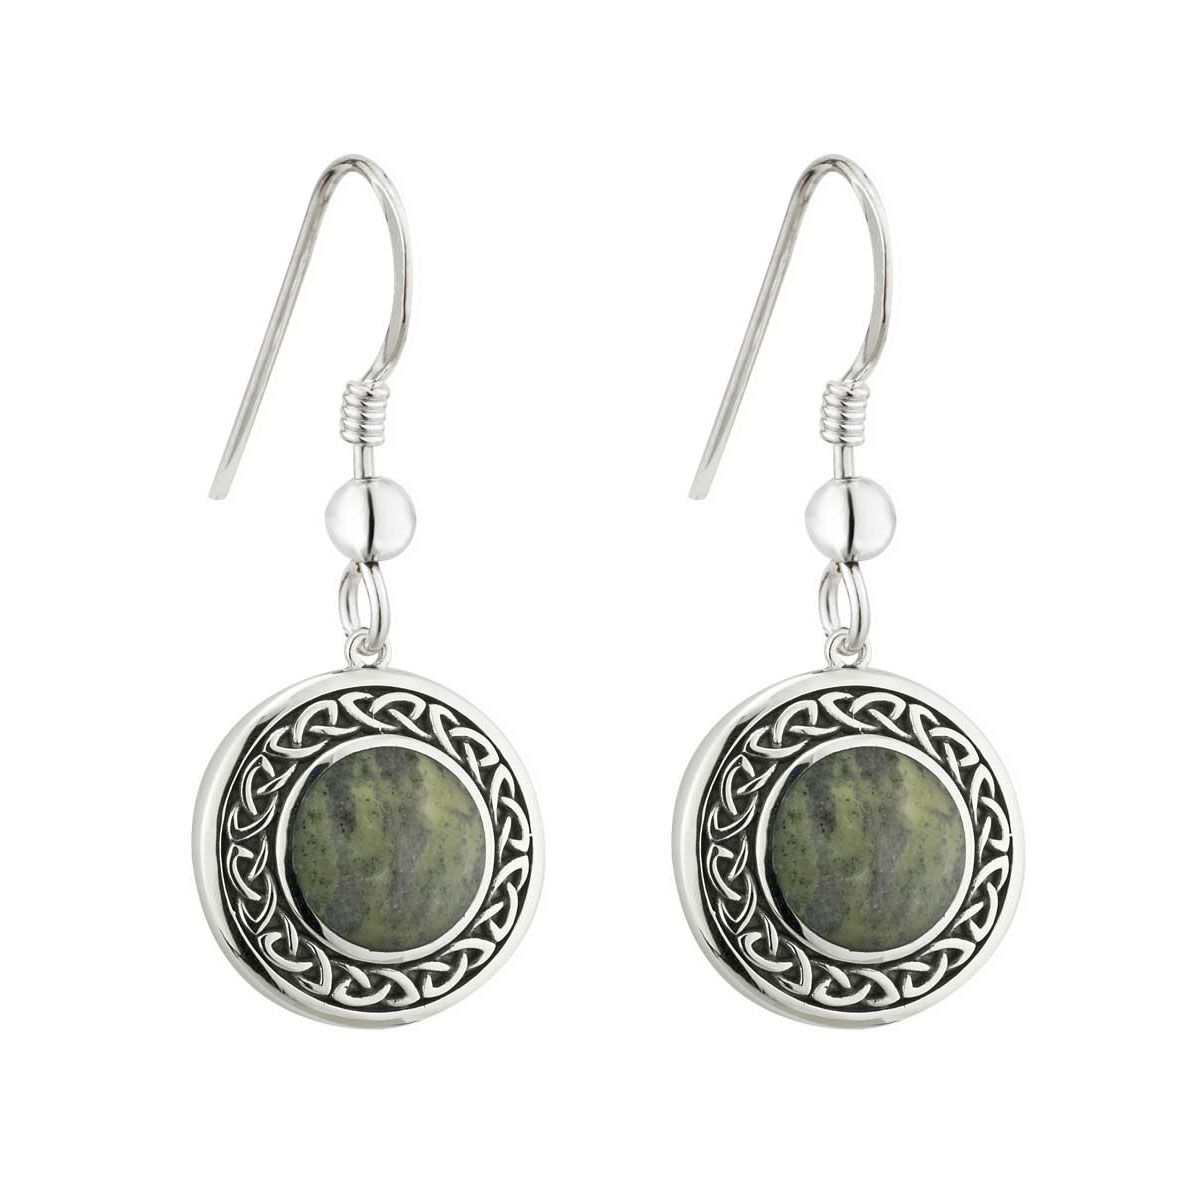 Cashs Ireland Sterling Silver and Connemara Marble Round Celtic Drop Earrings Pair